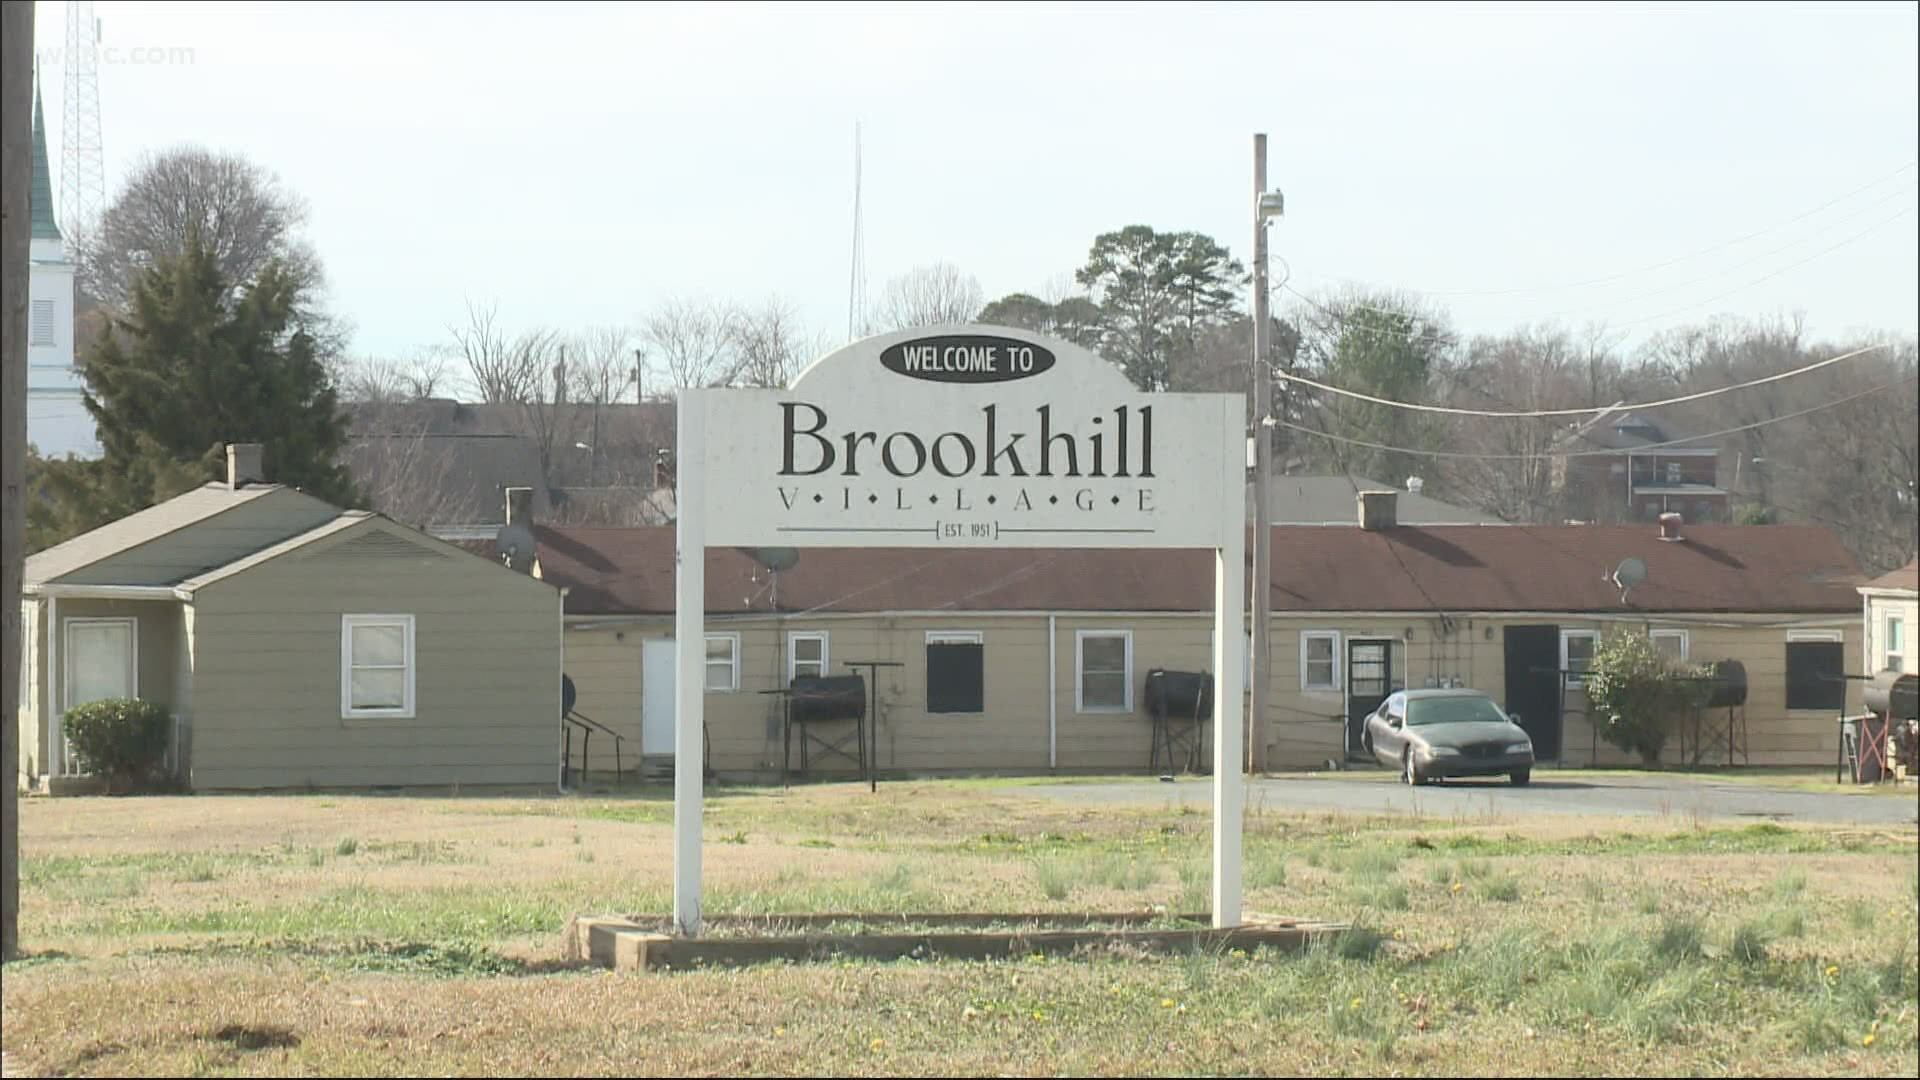 The Brookhill Development project aims to redevelop an area dedicated to affordable housing in South End.